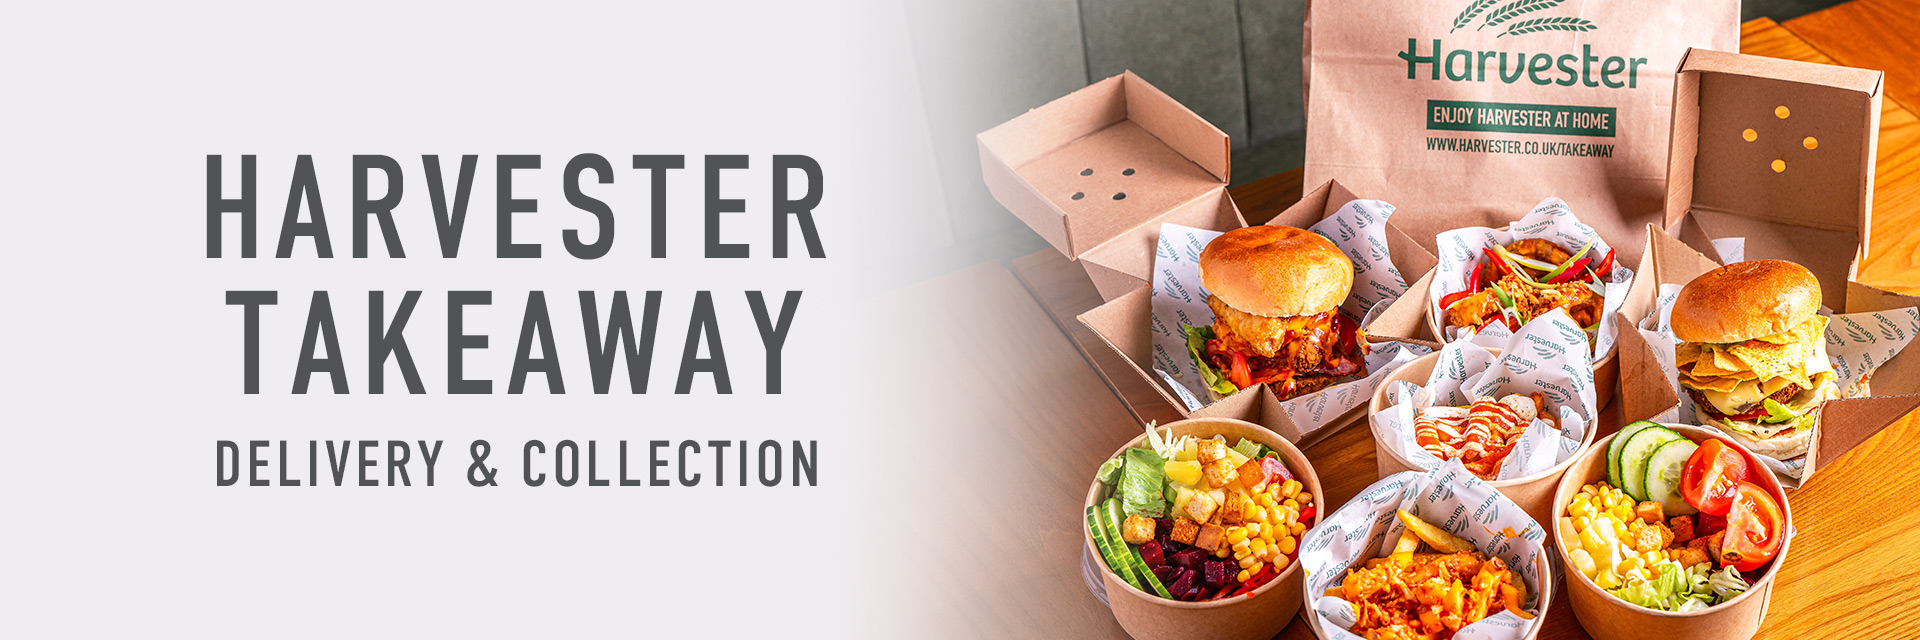 Harvester Cwmbran takeaway, delivery, collection